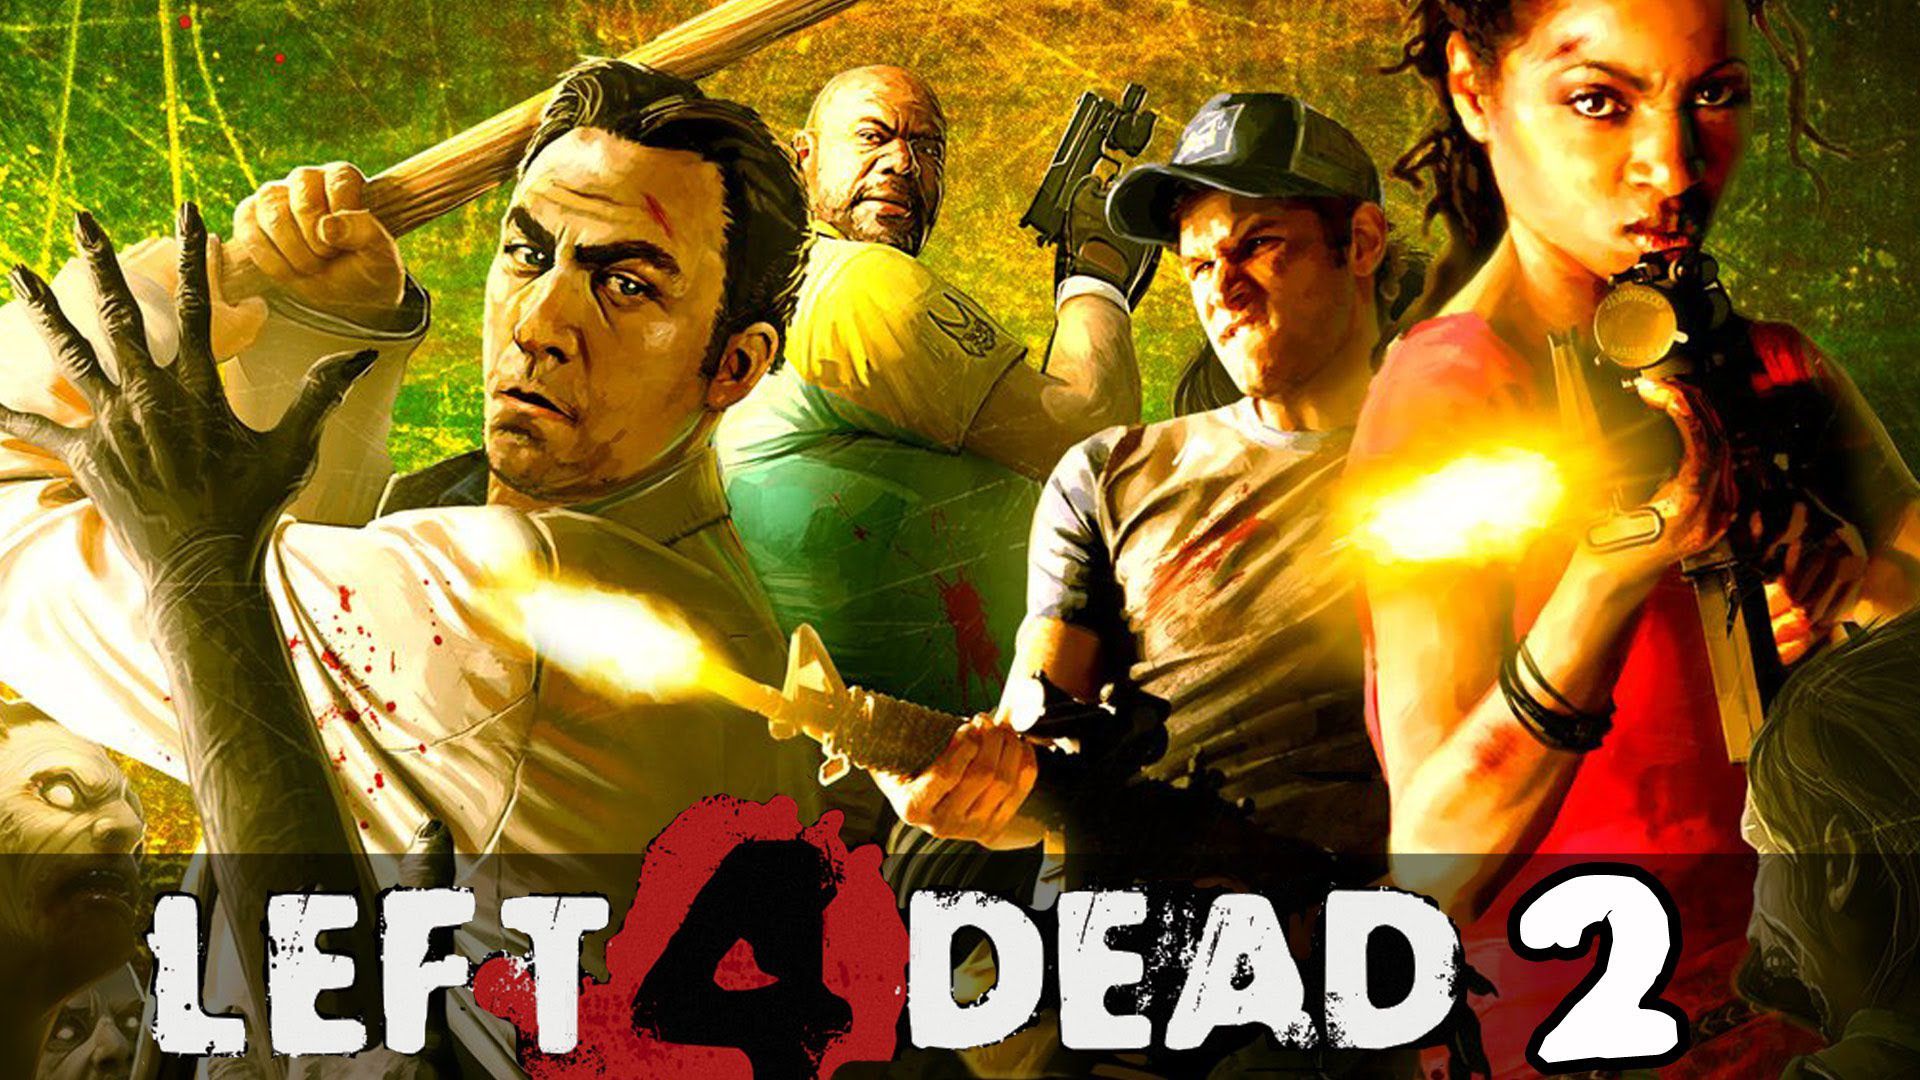 Left 4 Dead 2 For Xbox One Through BC; How To Get It